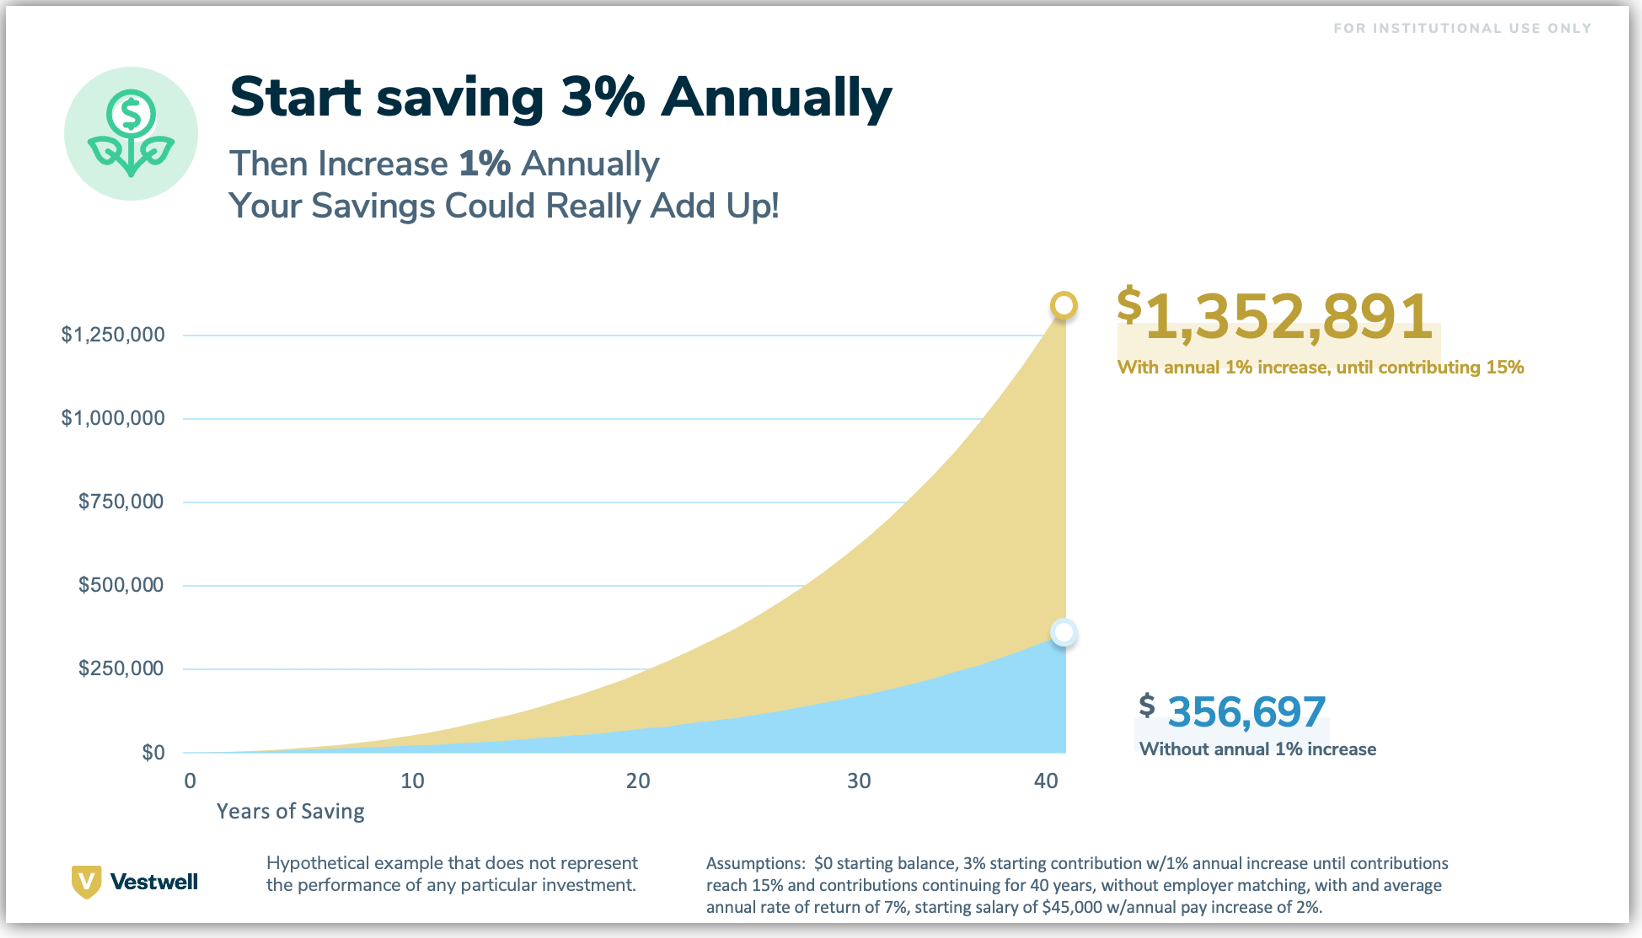 This is an image of savings chart